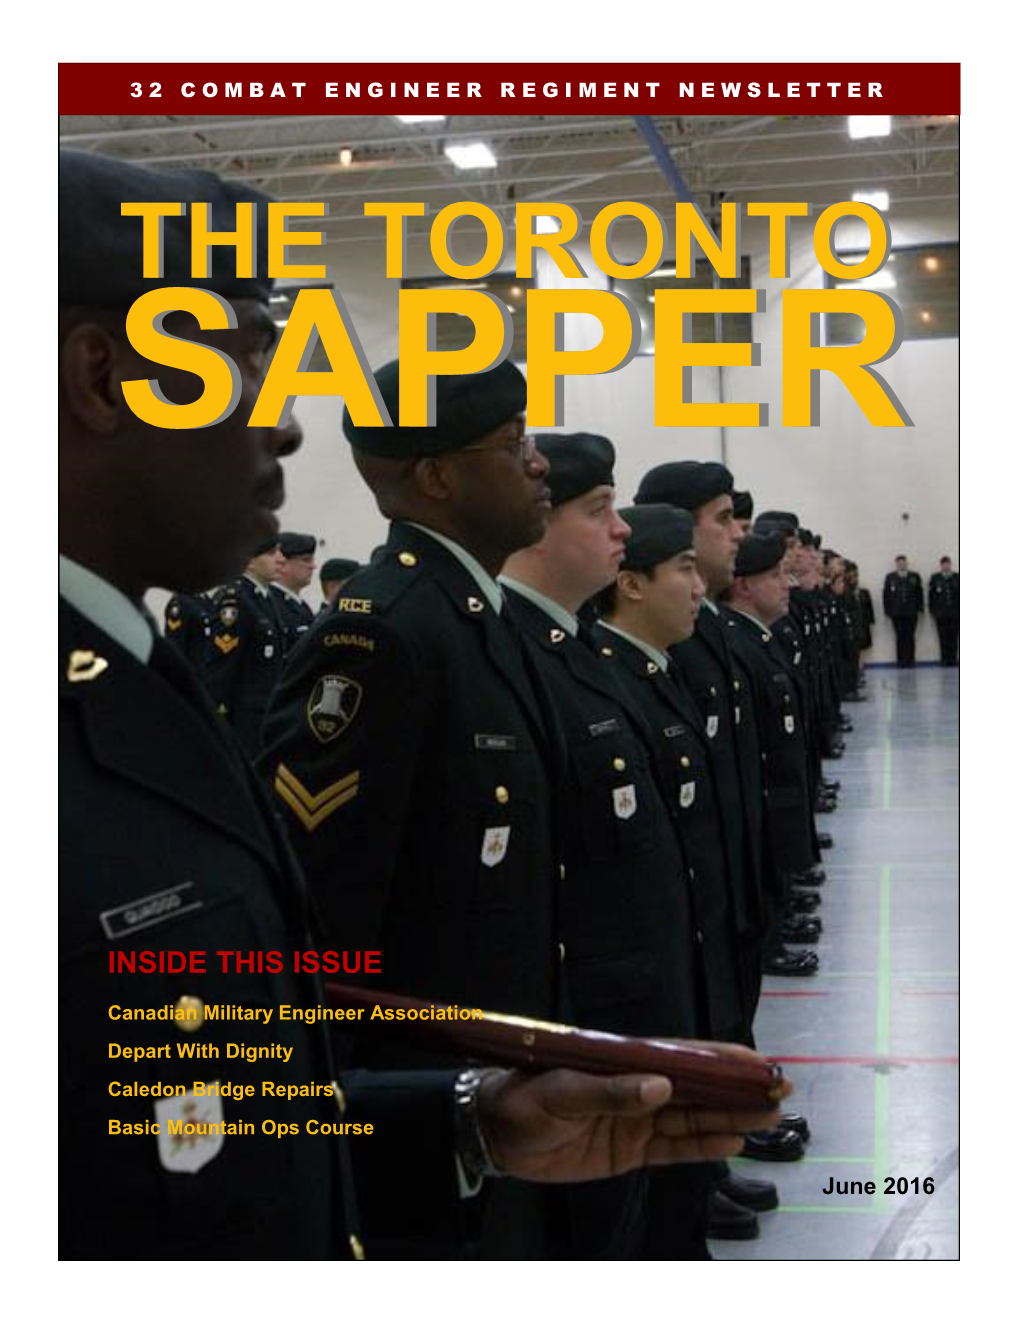 The Toronto Sappers Associa- Even This Early a Canadian Connection Was Beginning! Tion